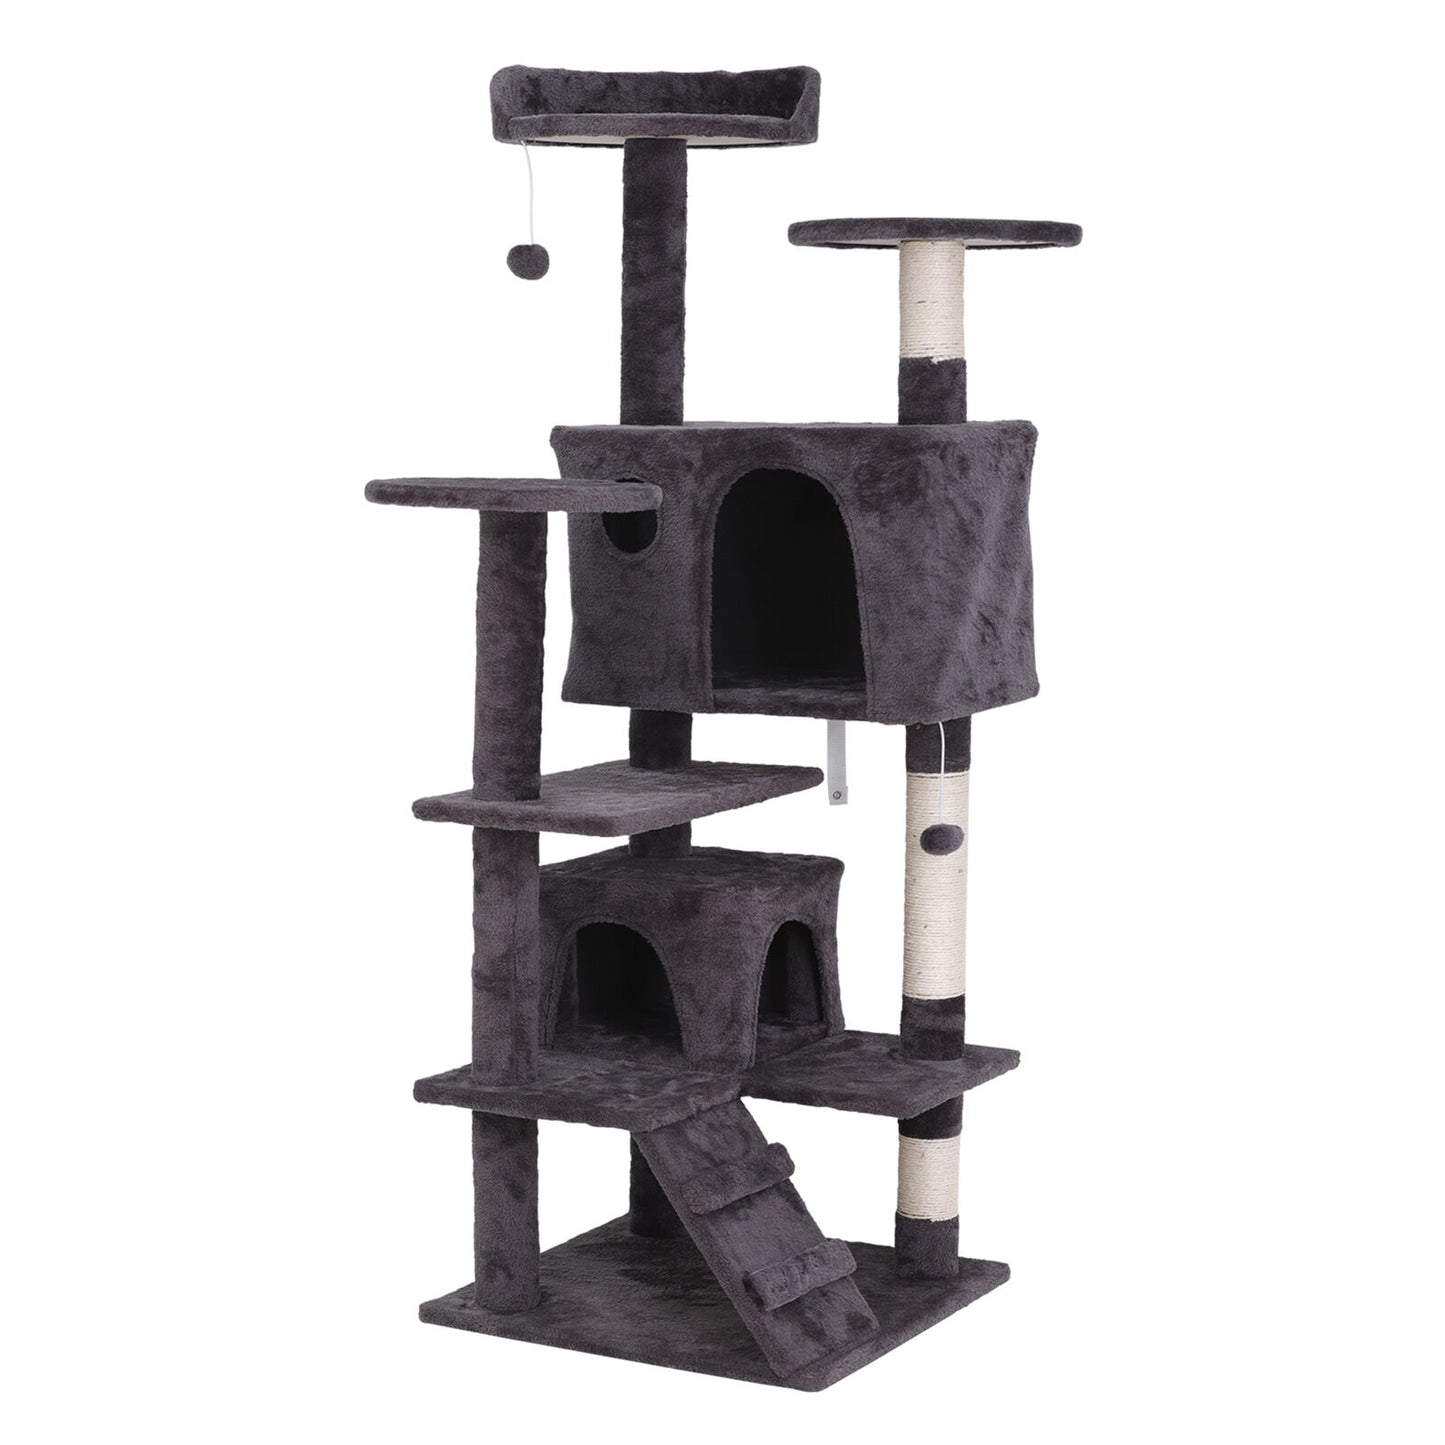 53" Cat Tree Activity Tower Pet Kitty Furniture with Scratching Posts  Ladders